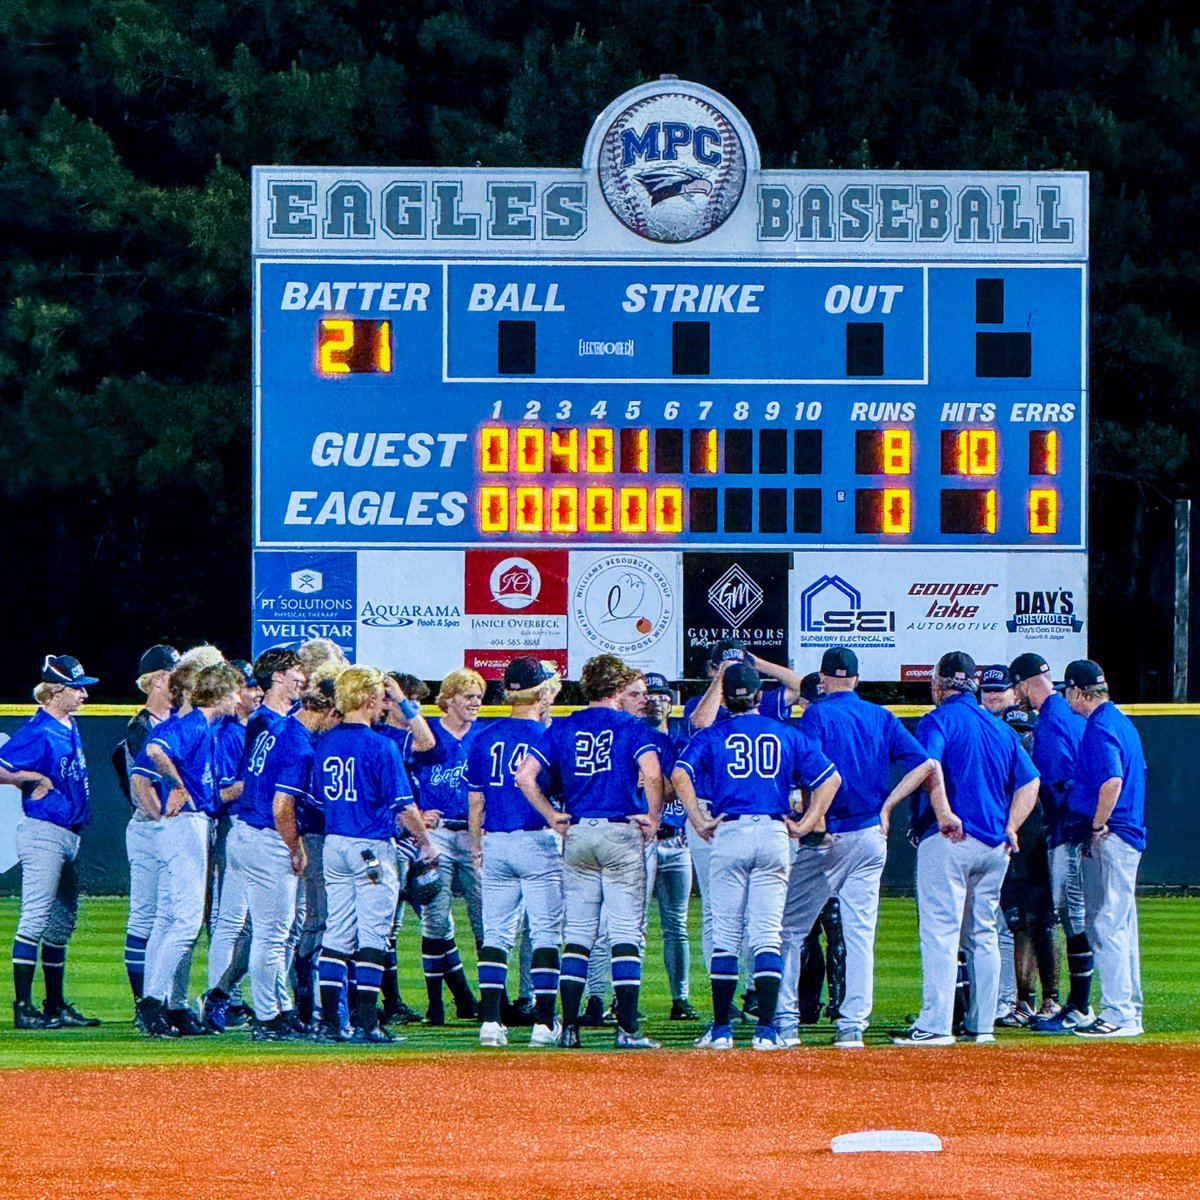 The varsity #MPCBaseball team advanced to the #Final4 with their 6-0 and 8-0 victories over Worth County. In game 1, your Eagles got 2 hits each from B. Gabel, C. Landmesser and R. Bonner. H. Akopov hit a big solo homerun to solidify win along with the complete game shutout